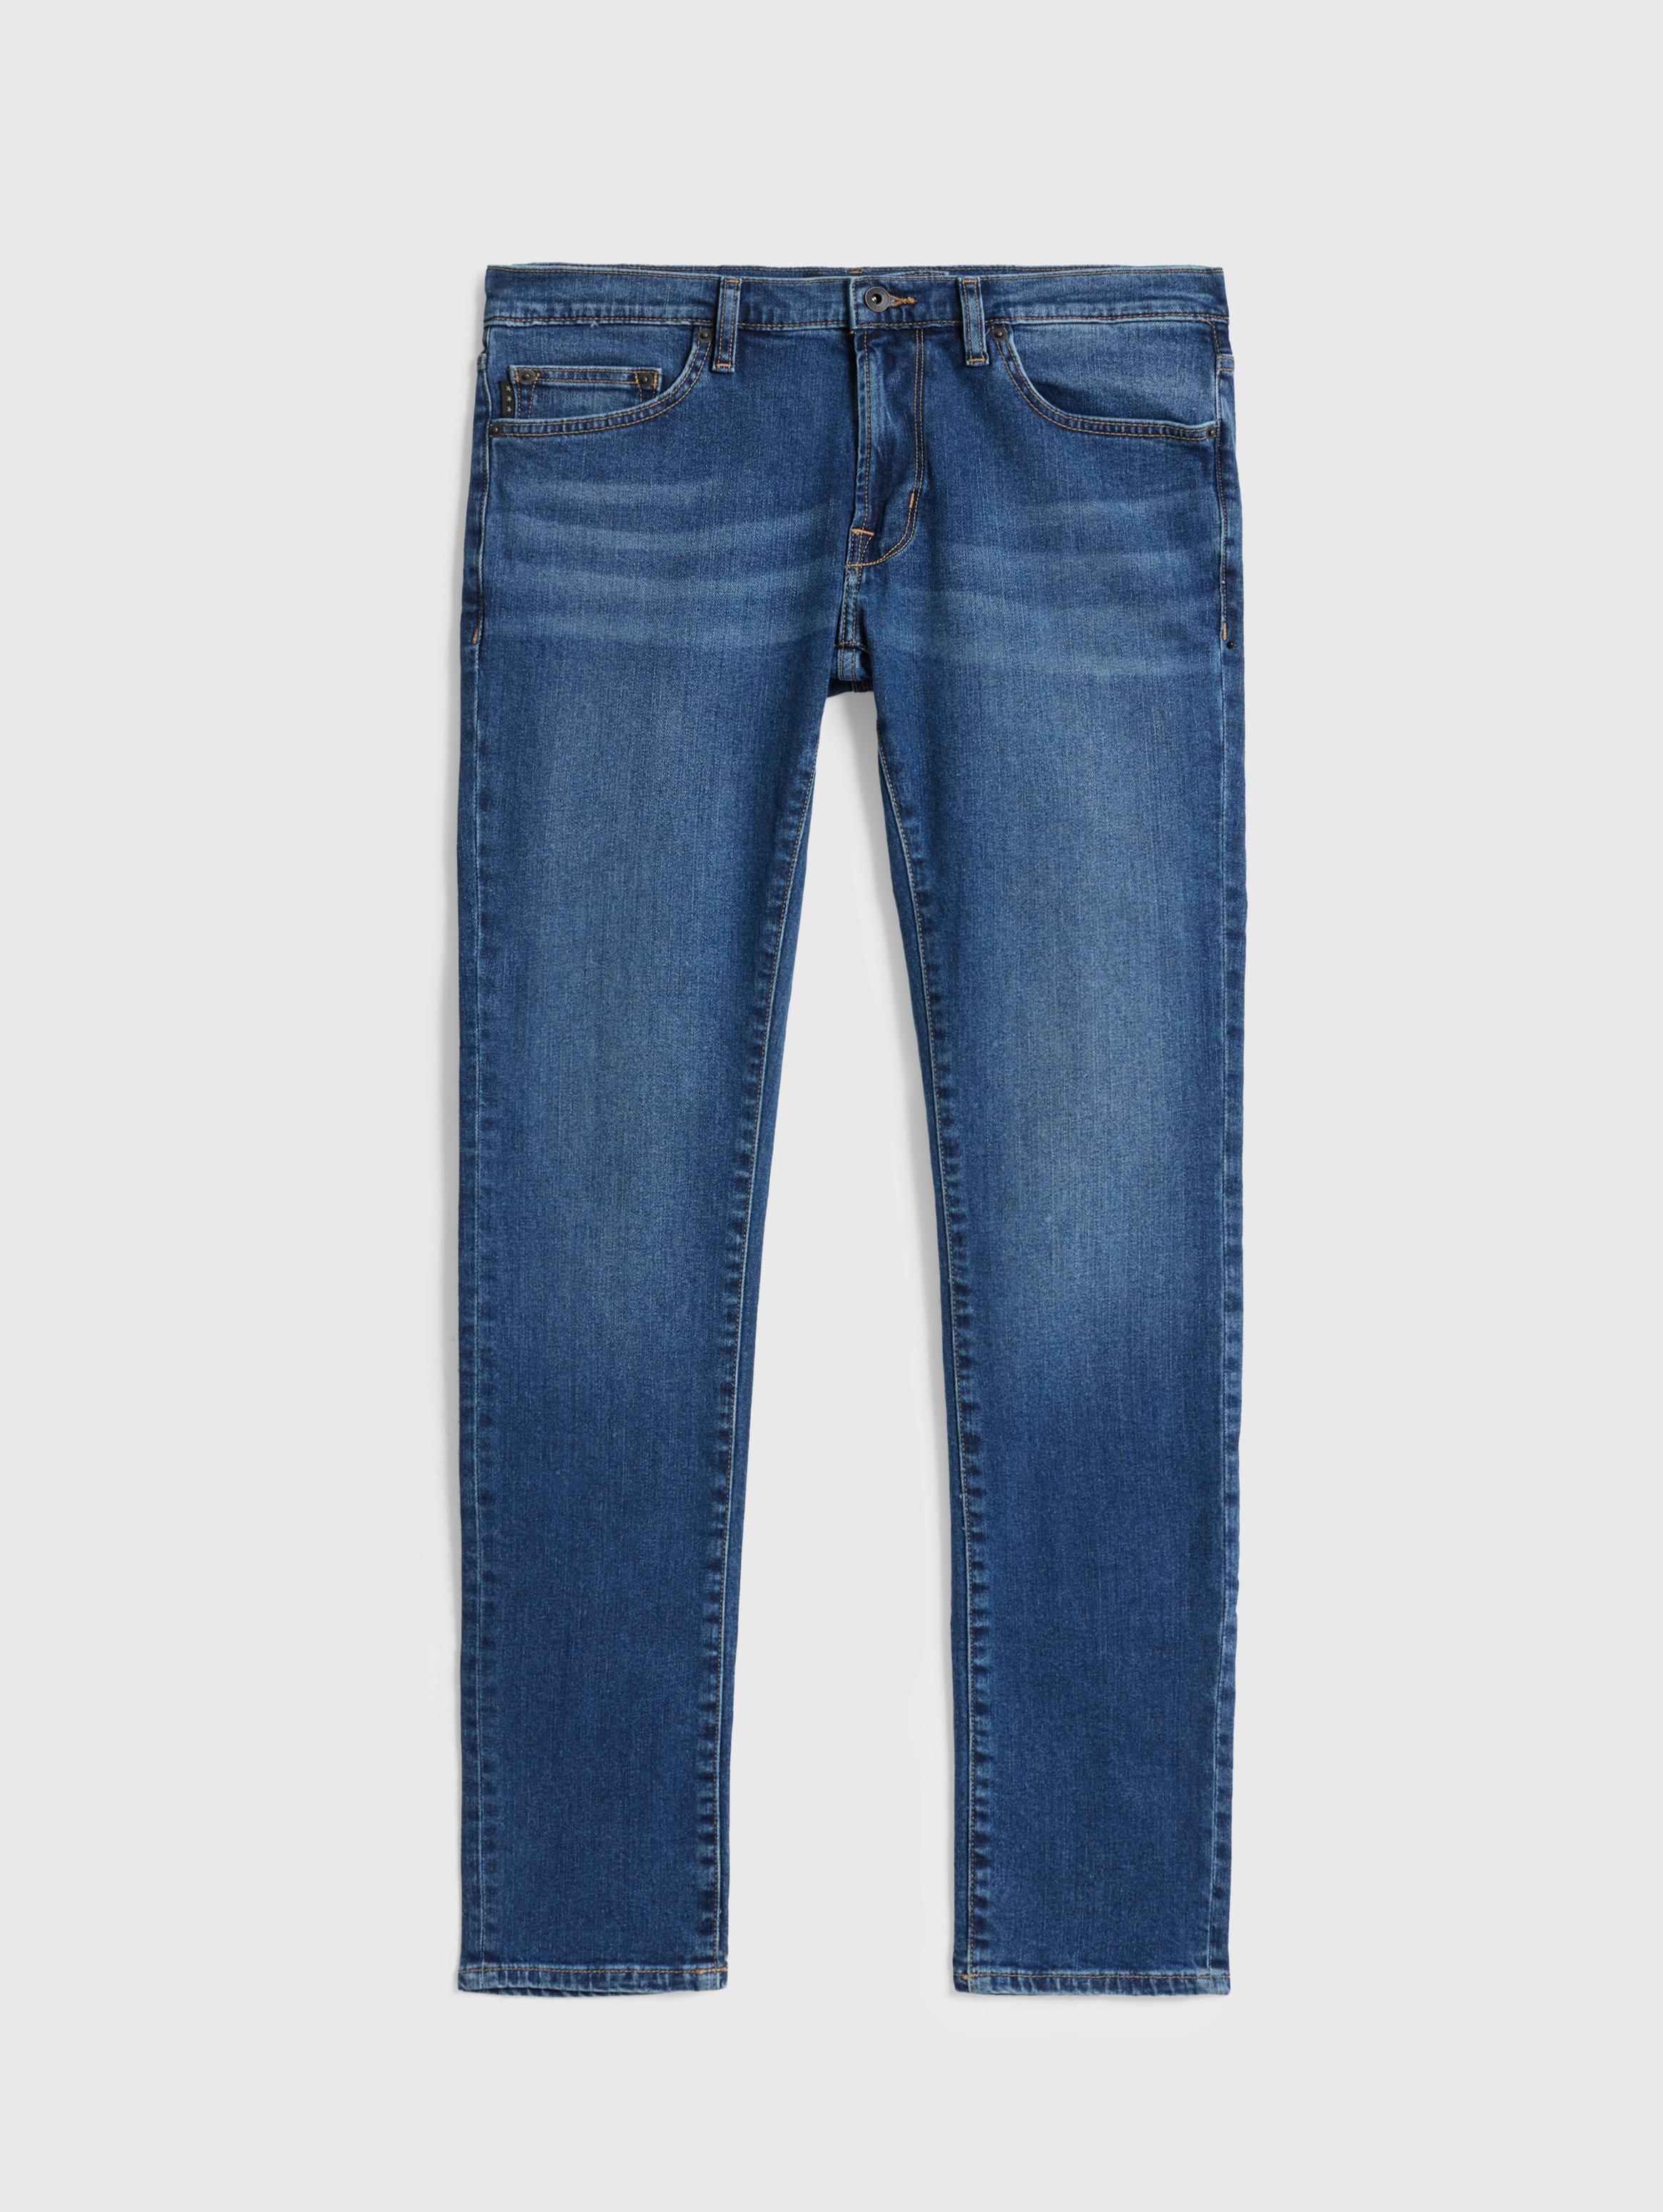 WIGHT JEANS